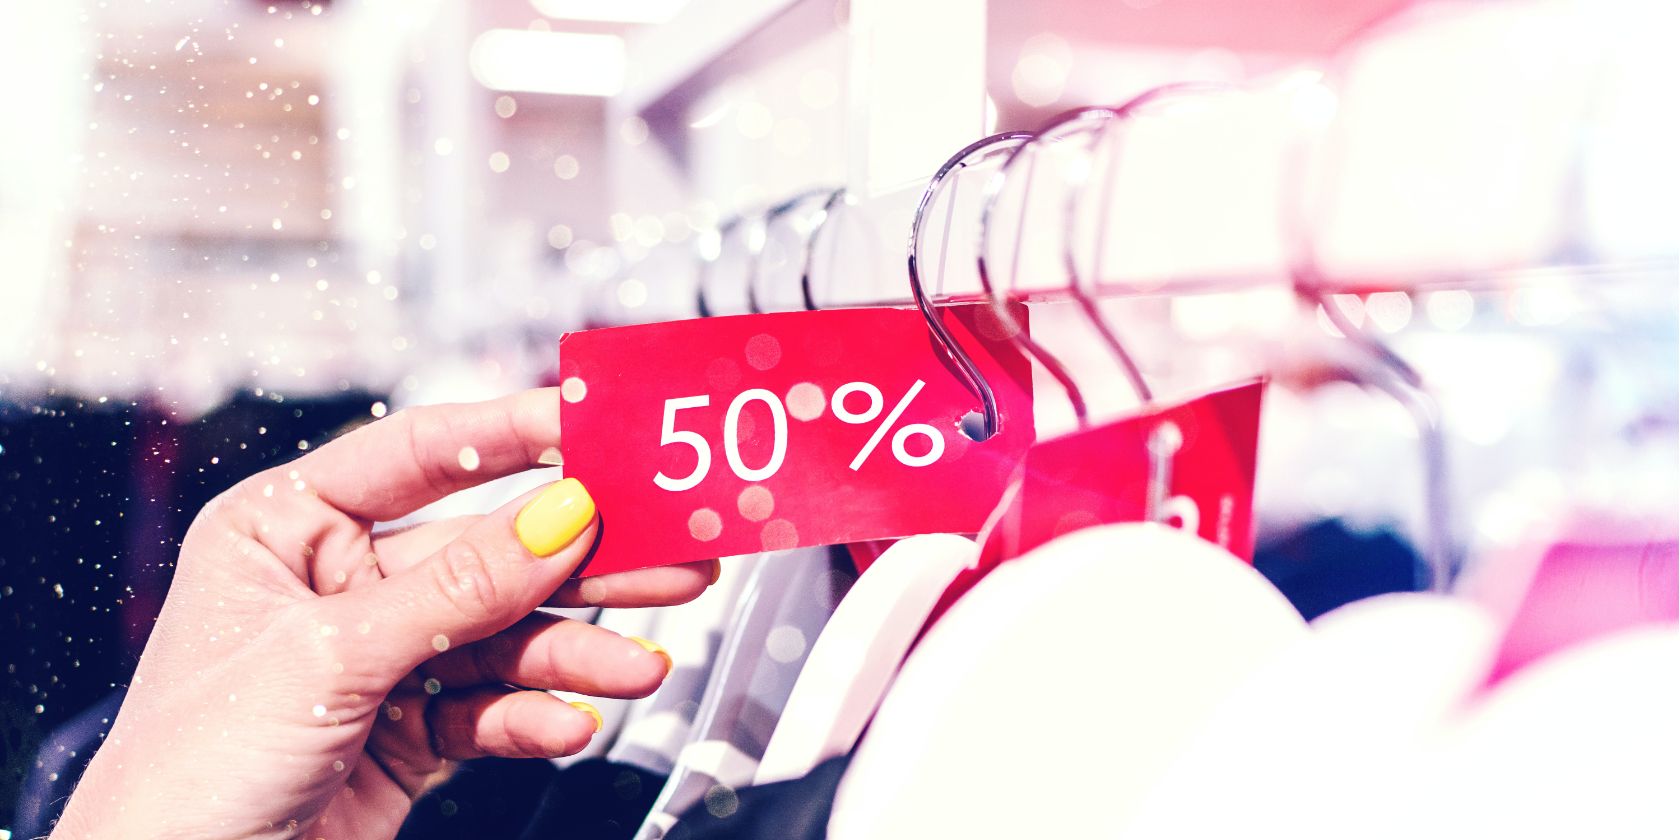 A lady holding a discount price tag on a hanger in a store